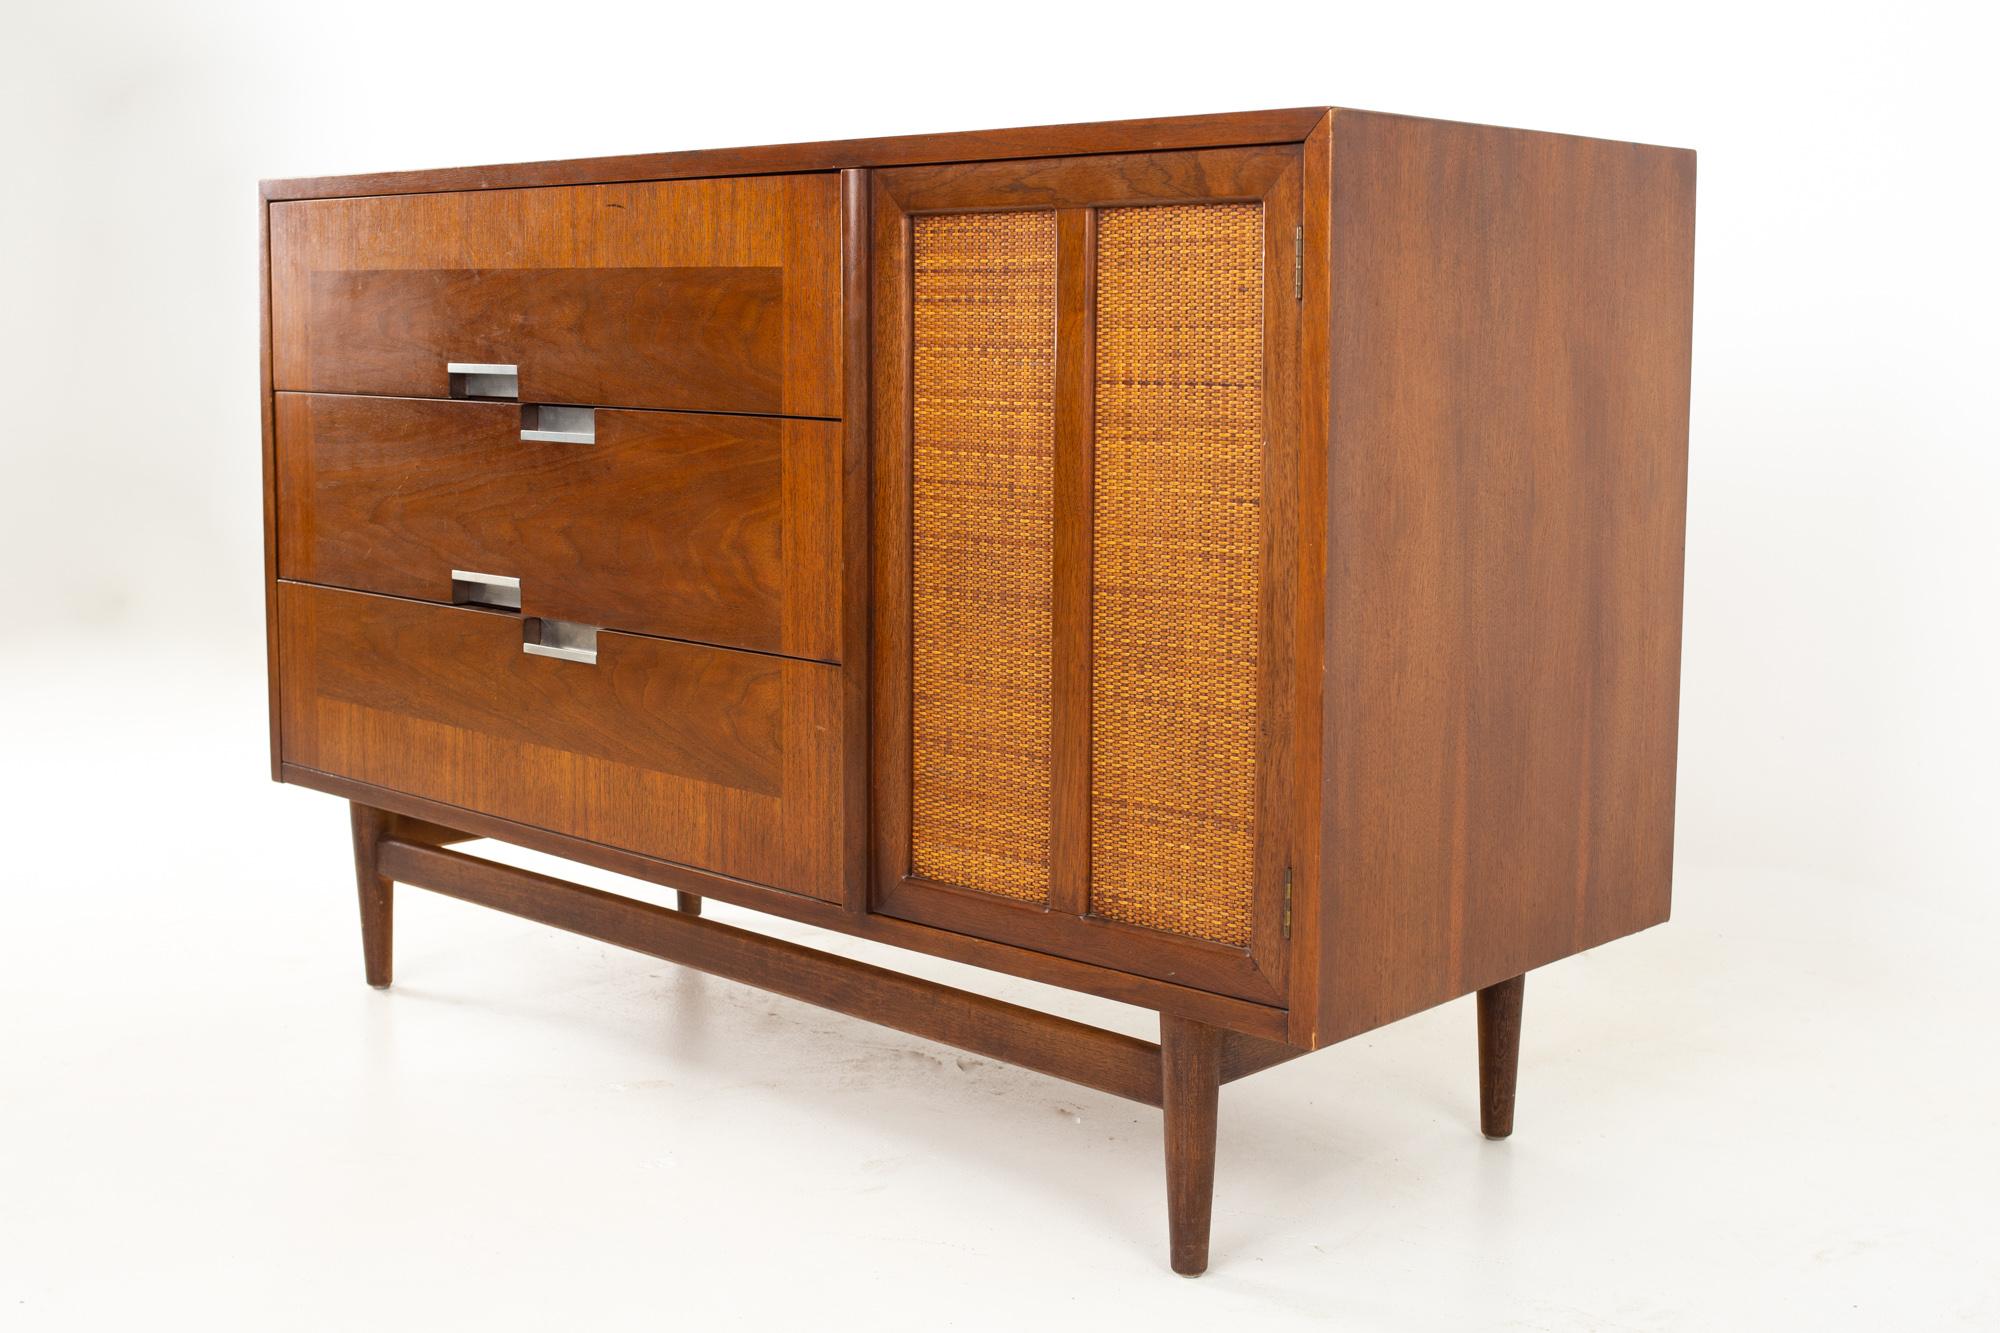 Merton Gershun for American of Martinsville midcentury walnut and cane sideboard buffet credenza
Credenza measures: 50 wide x 19 deep x 31 inches high

All pieces of furniture can be had in what we call restored vintage condition. That means the